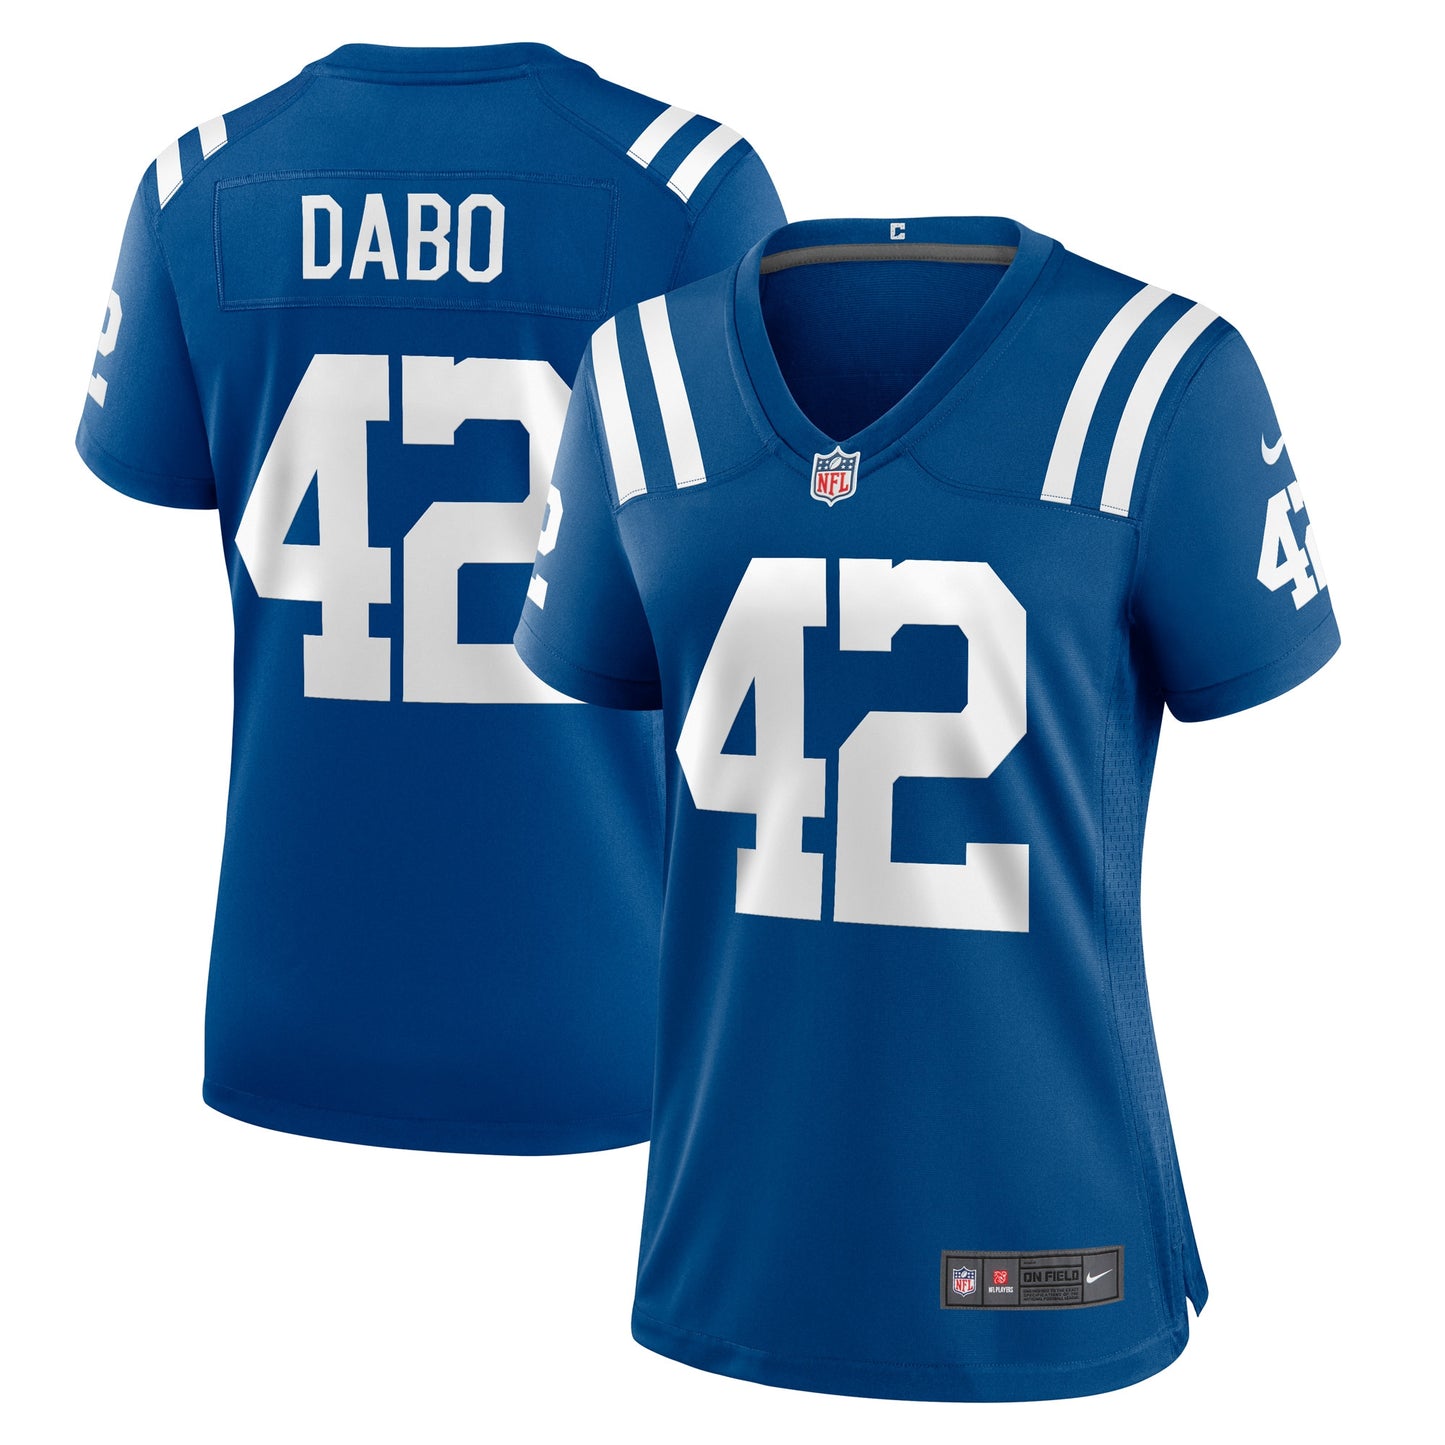 Marcel Dabo Indianapolis Colts Nike Women's Game Player Jersey - Royal